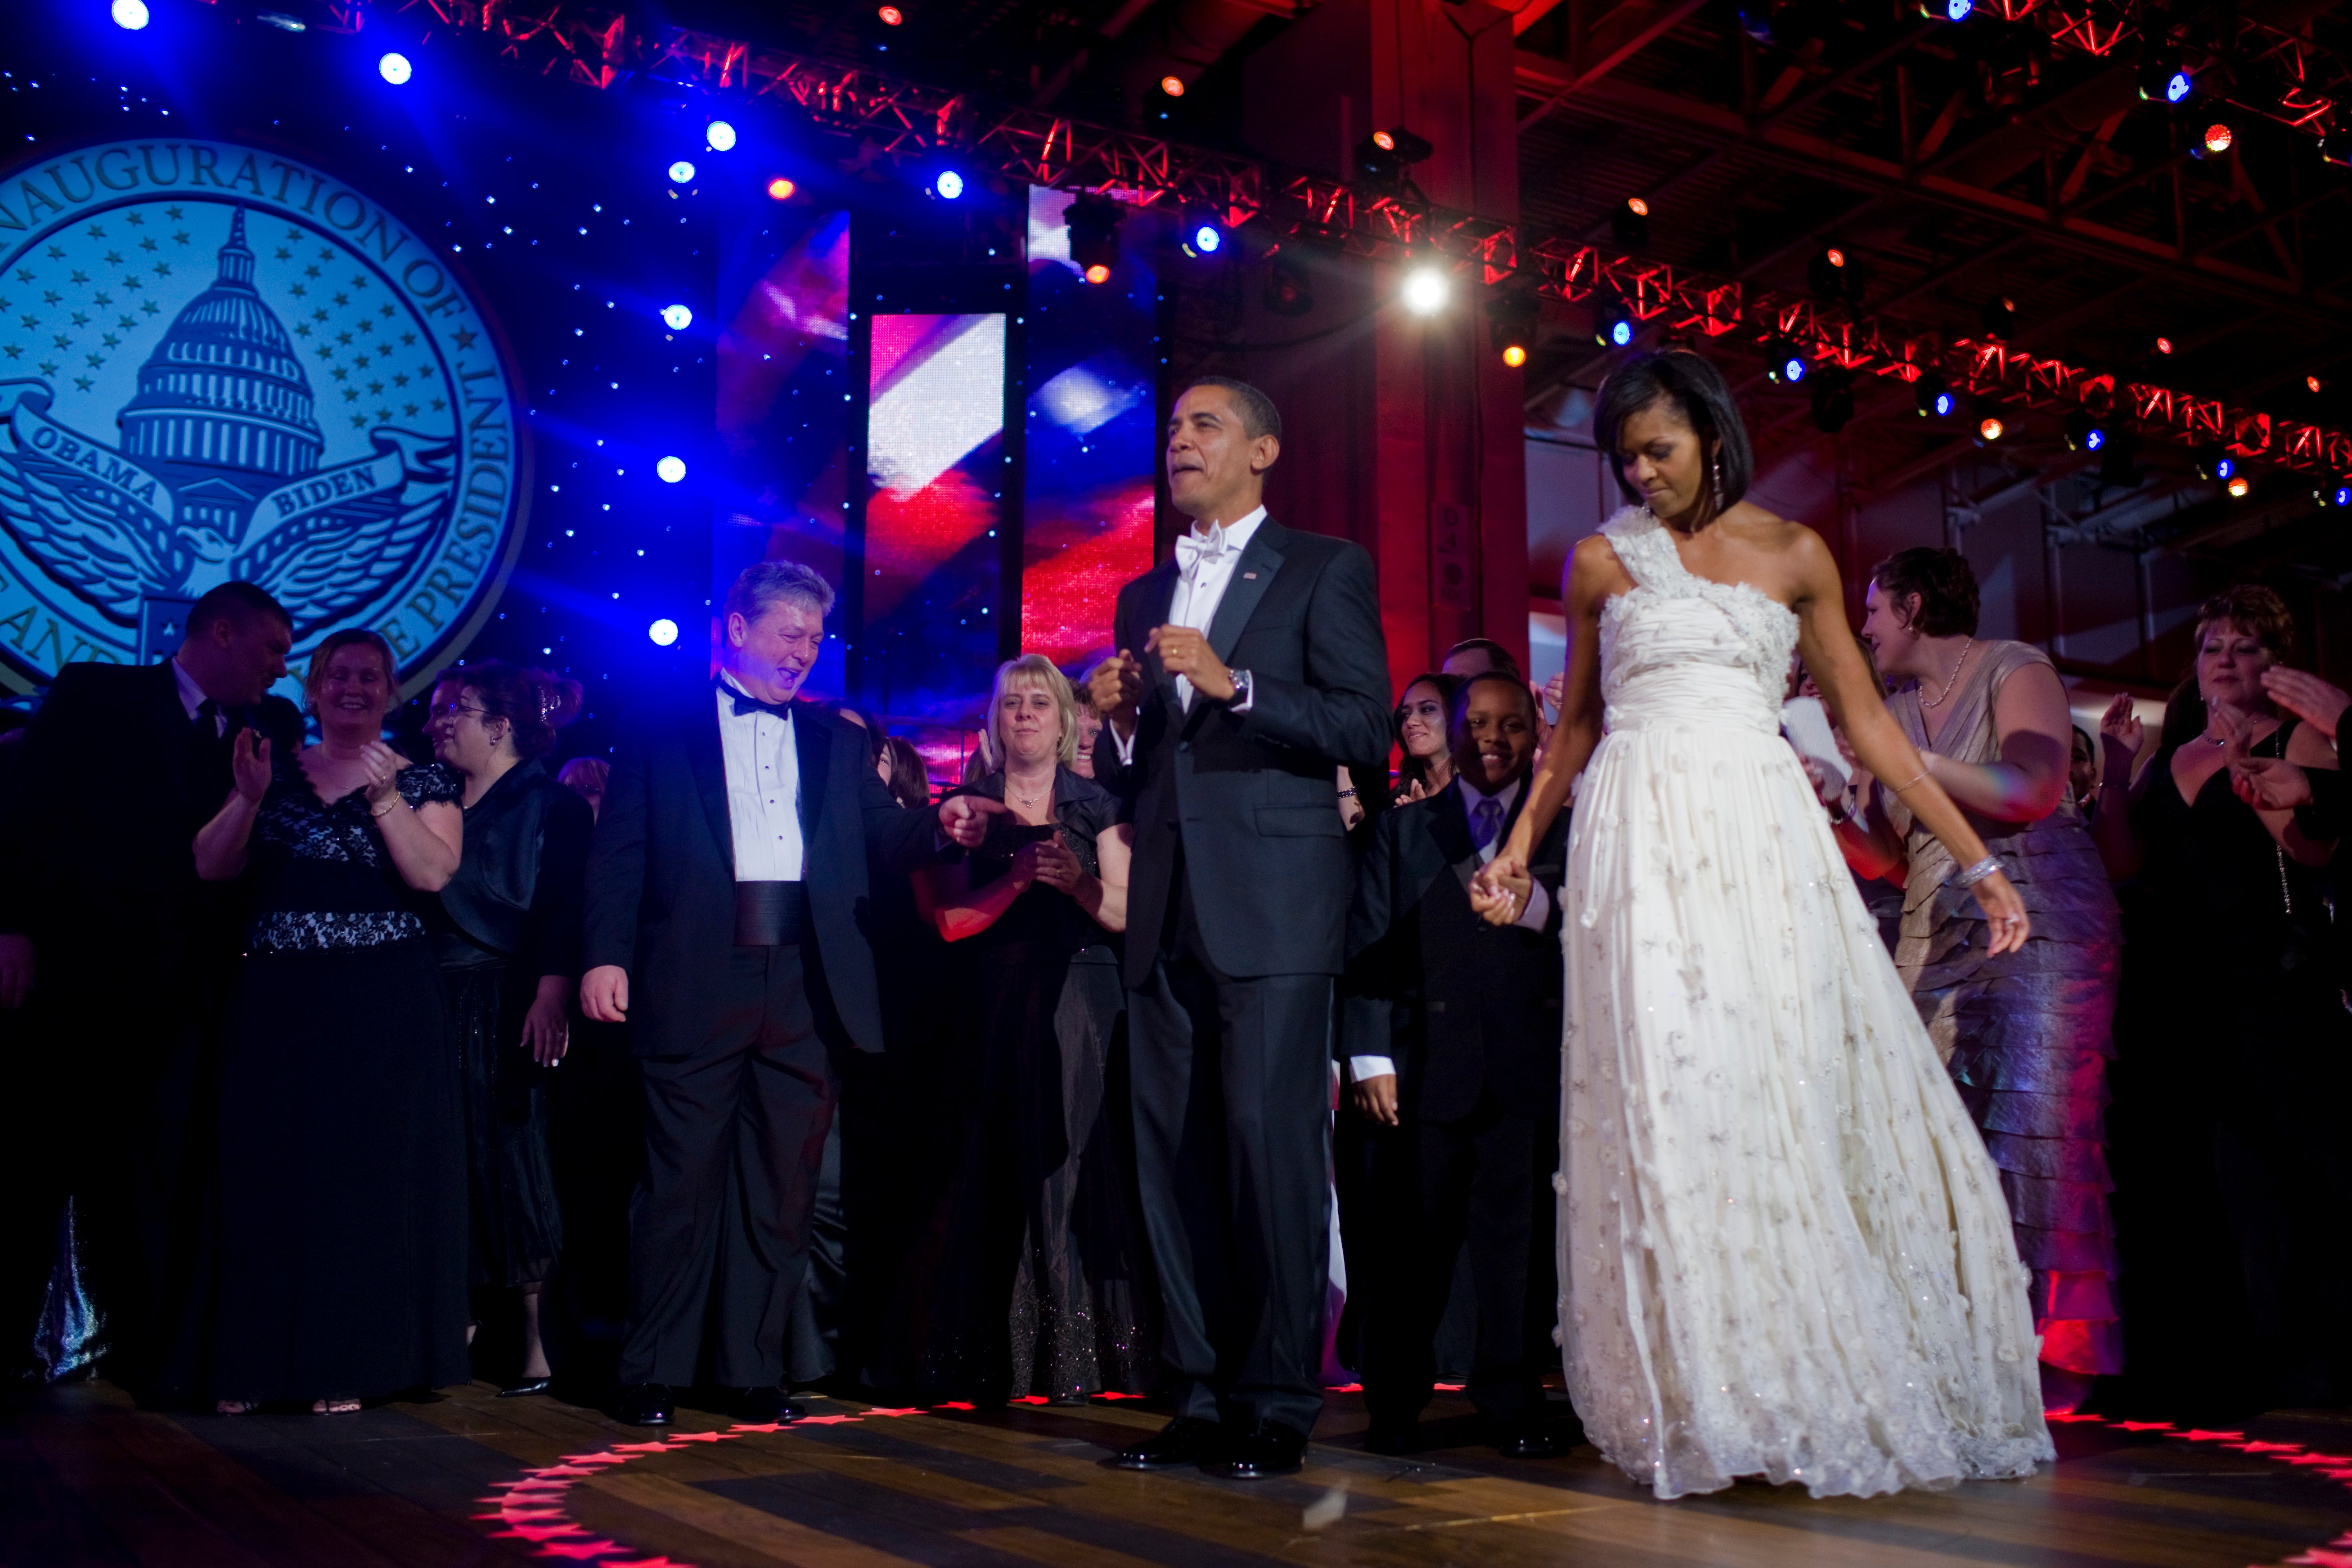 A Timeline Of Obama’s Blackest White House Parties
